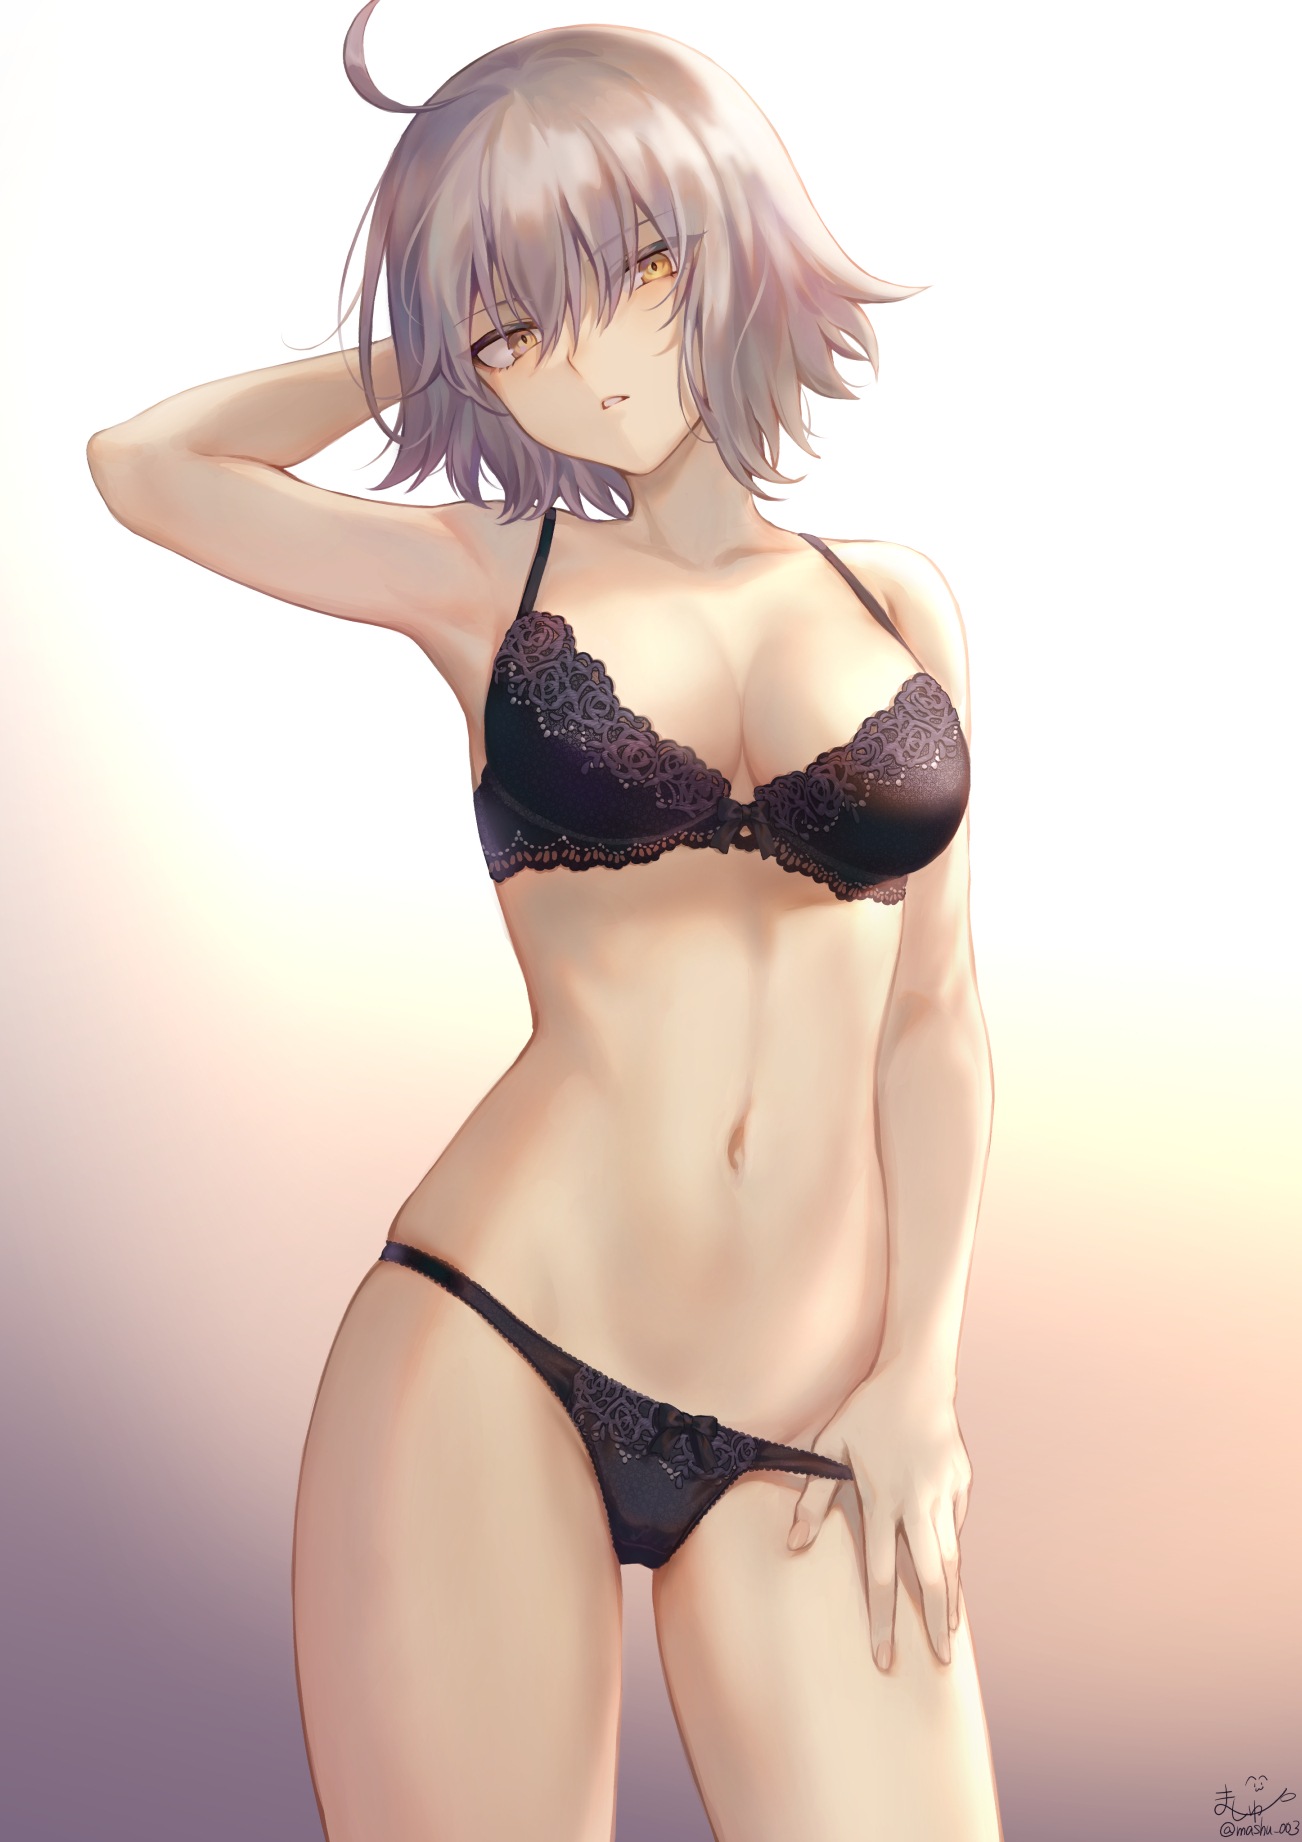 Hot Sexy Hentai In Lingerie - Sexy girls of anime posing in hot lingerie and stockings - 26 Pics | Hentai  City